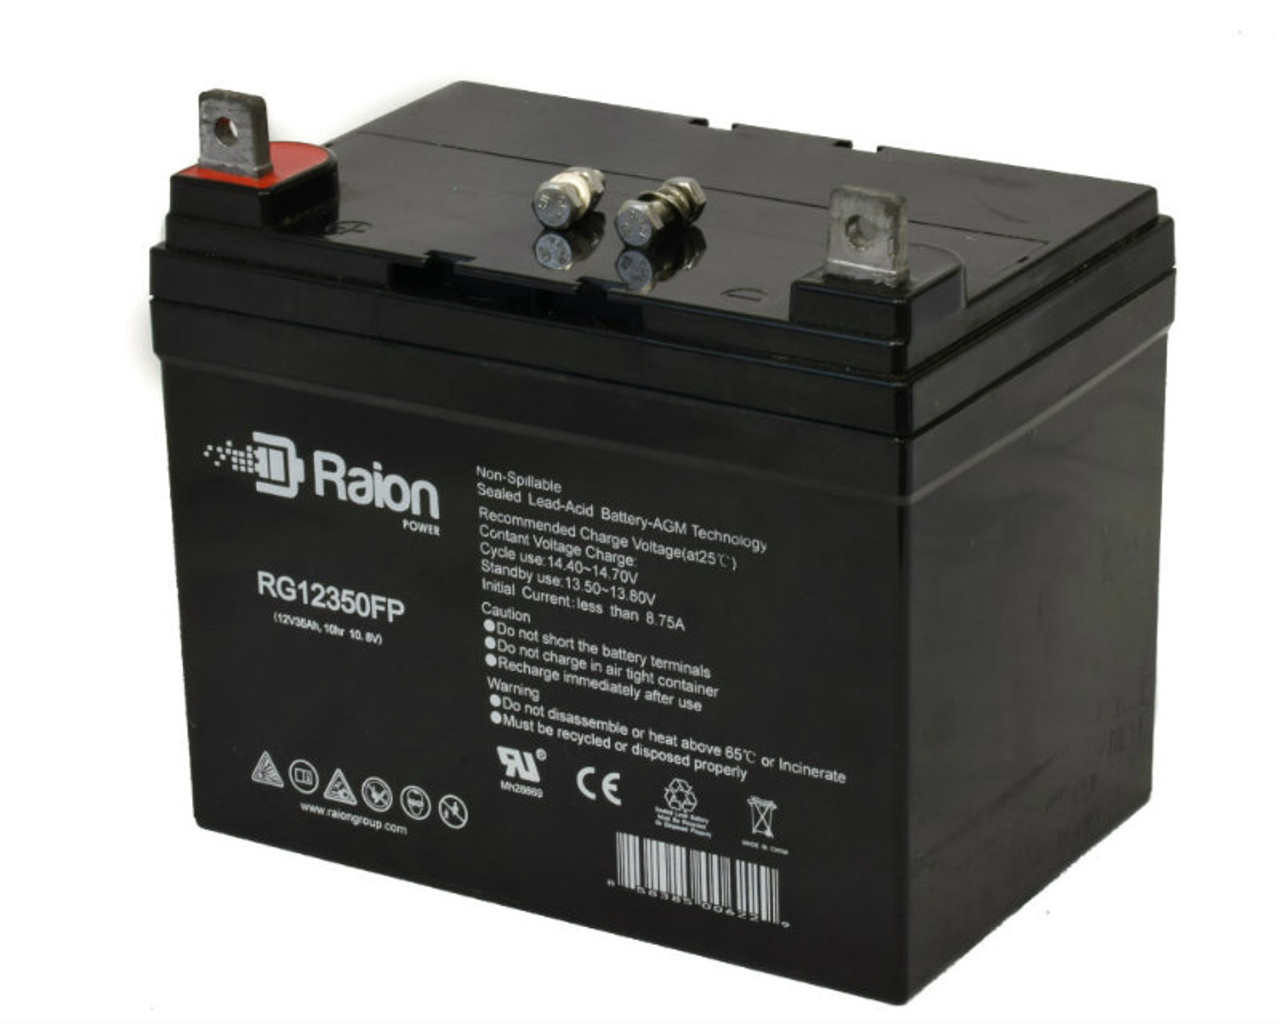 Raion Power Replacement 12V 35Ah Battery for Impact Instrumentation Vac-Pac Portable Aspirator - 1 Pack